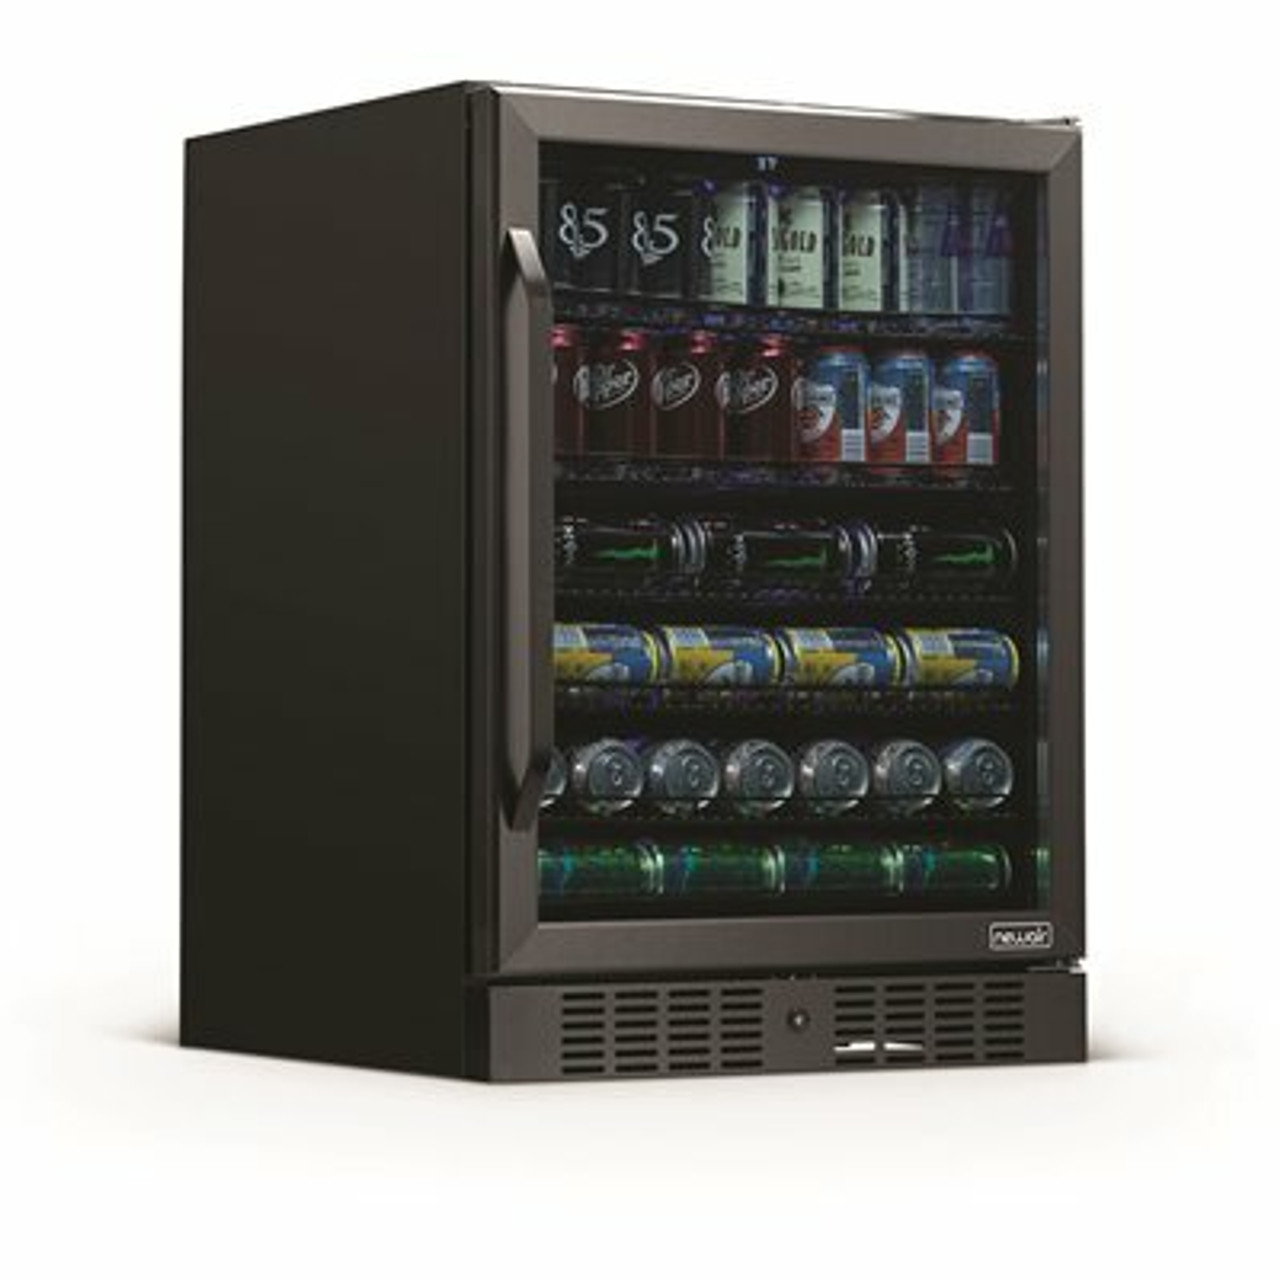 Single Zone 24 In. 177 (12 Oz.) Can Built-In Beverage Cooler Fridge With Precision Temp. Control - Black Stainless Steel